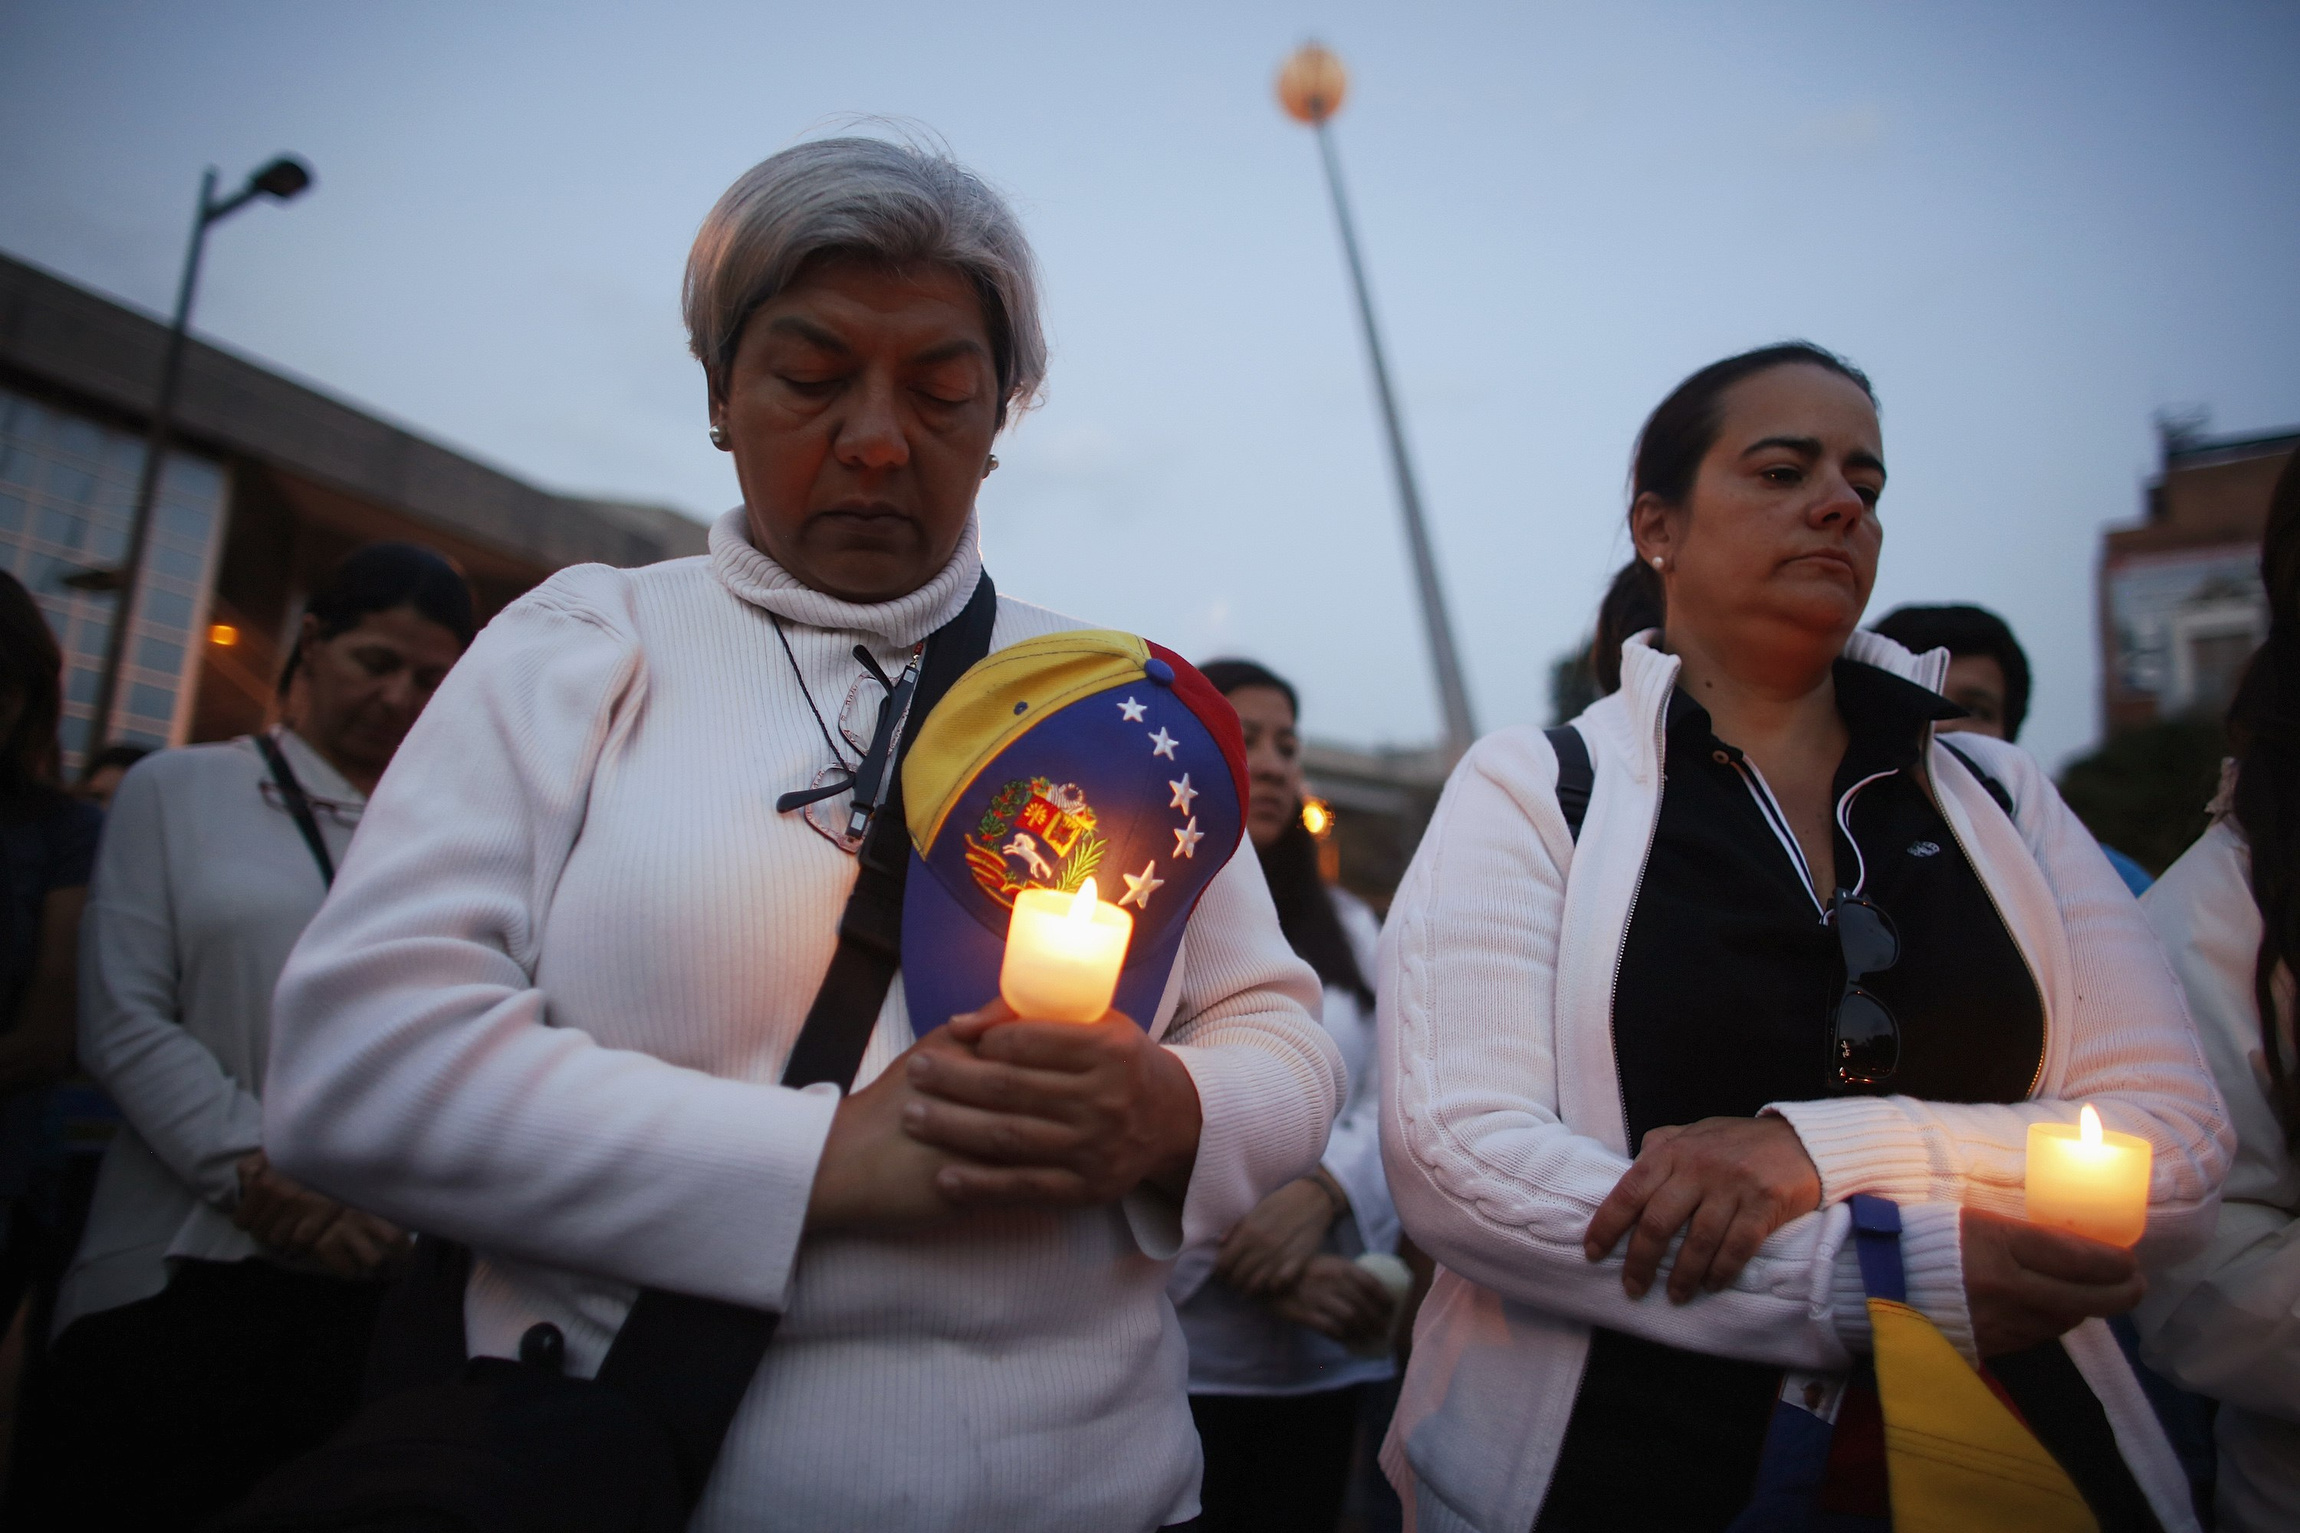 Anti-government protesters pray during a rally against violence in Caracas, Venezuela, in this March 5, 2014 file photo. Bishops in Caracas had urged both the government and protestors to resist violence amid a deepening standoff in Venezuela that has further polarized the country and left Church charities struggling. (CNS photo/Tomas Bravo, Reuters)